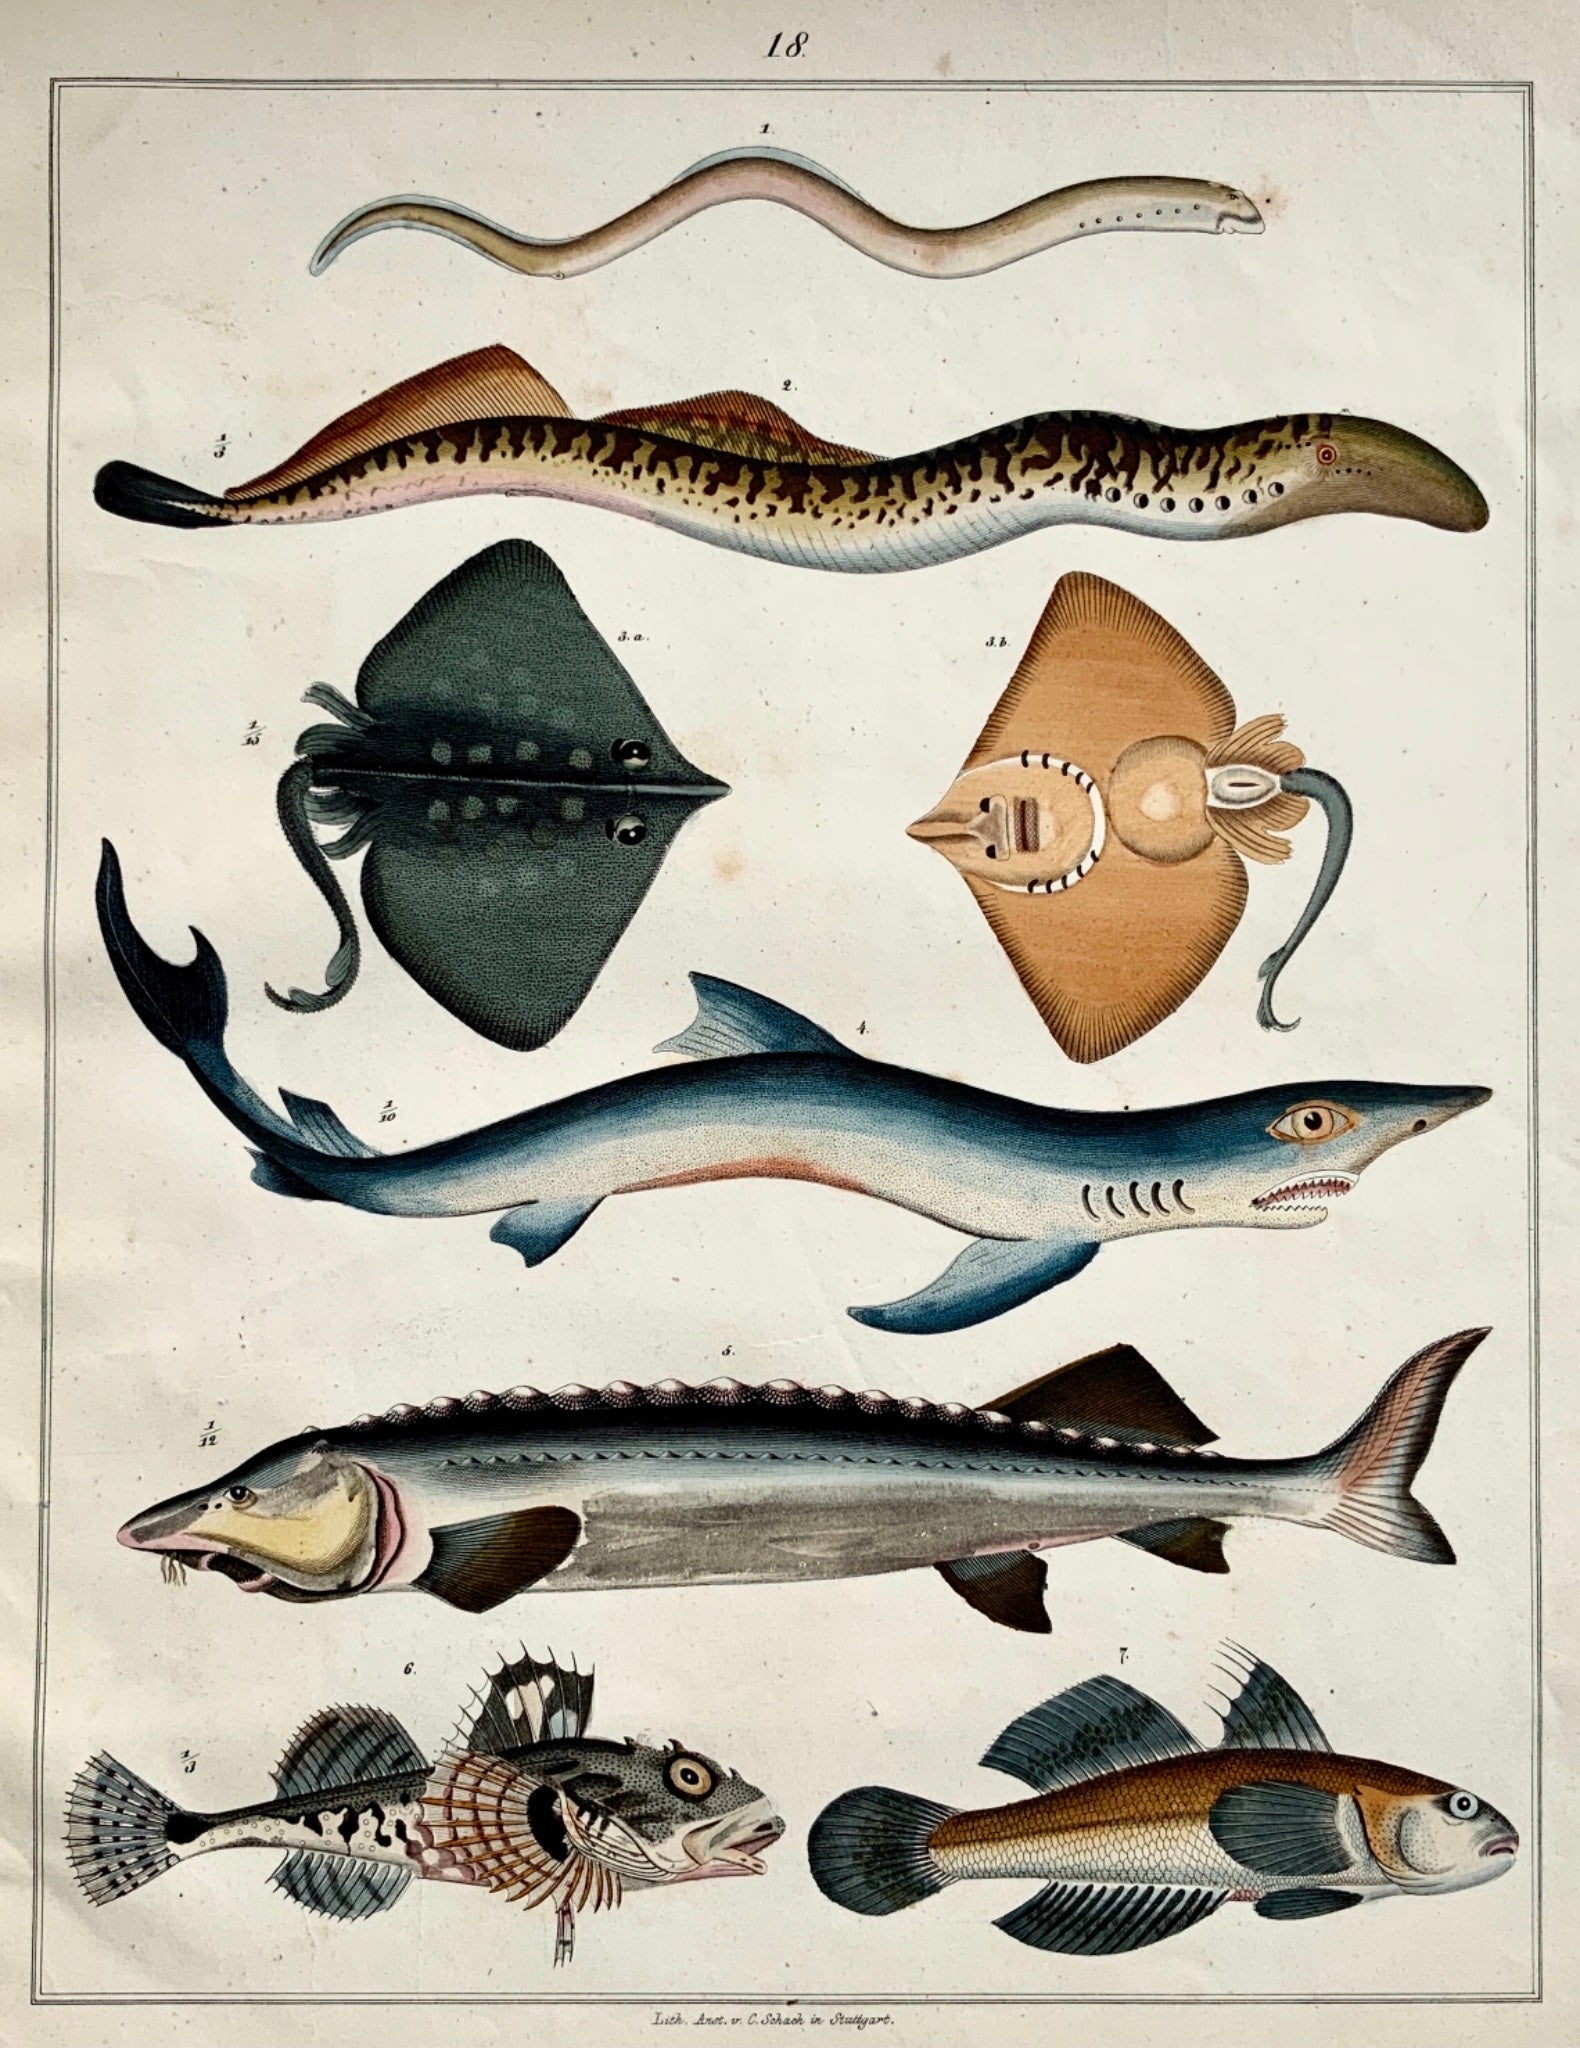 1830c C. Schach; FISH Ray Shark Sturgeon Eel - Large hand coloured lithograph